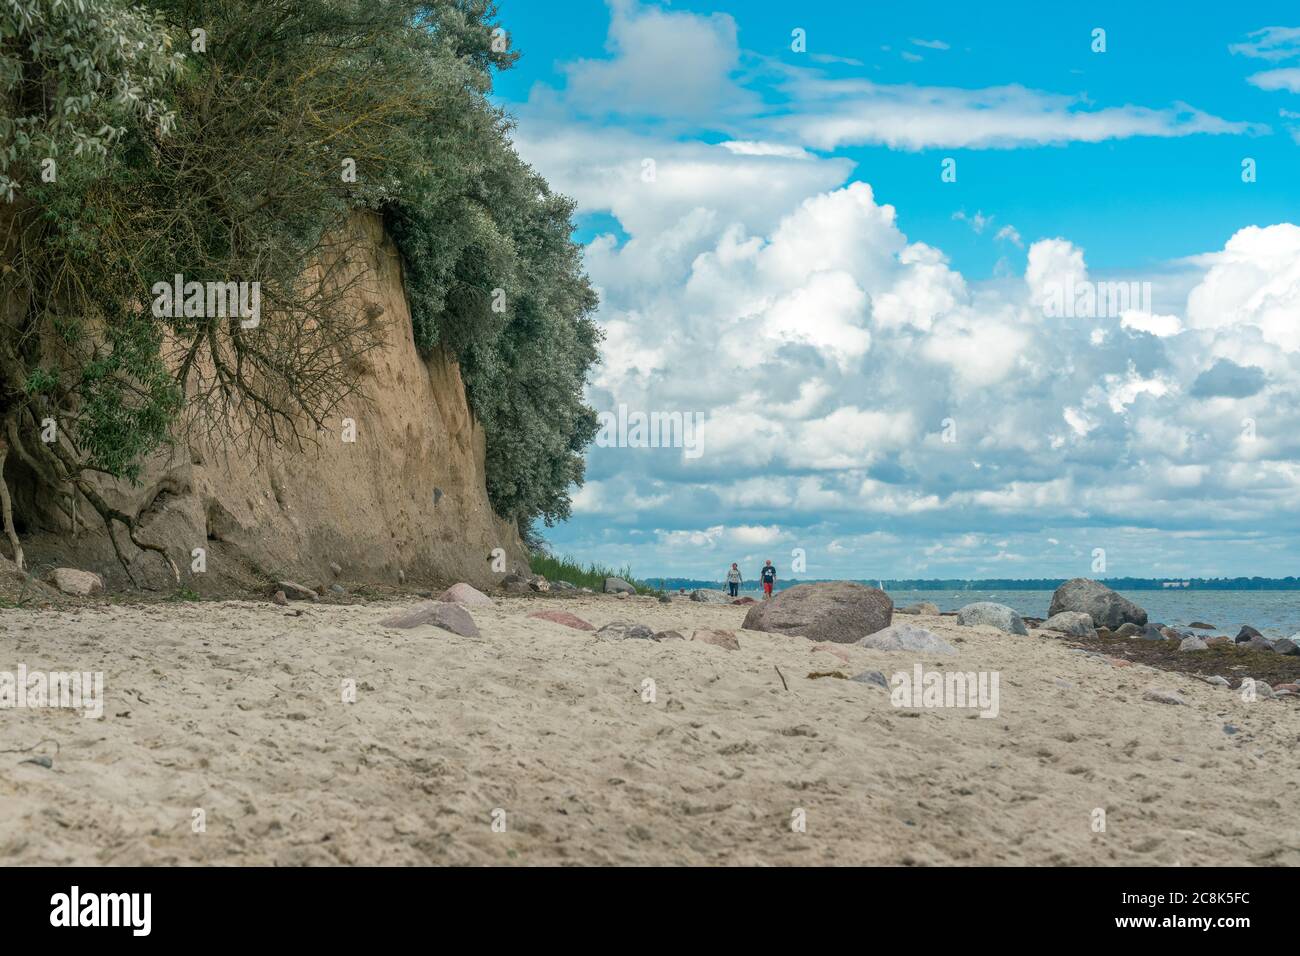 Poel, Mecklenburg, Germany - july 16, 2020: a man and a woman waking on the beach at the sandstone cliffs near Schwarzer Busch Stock Photo